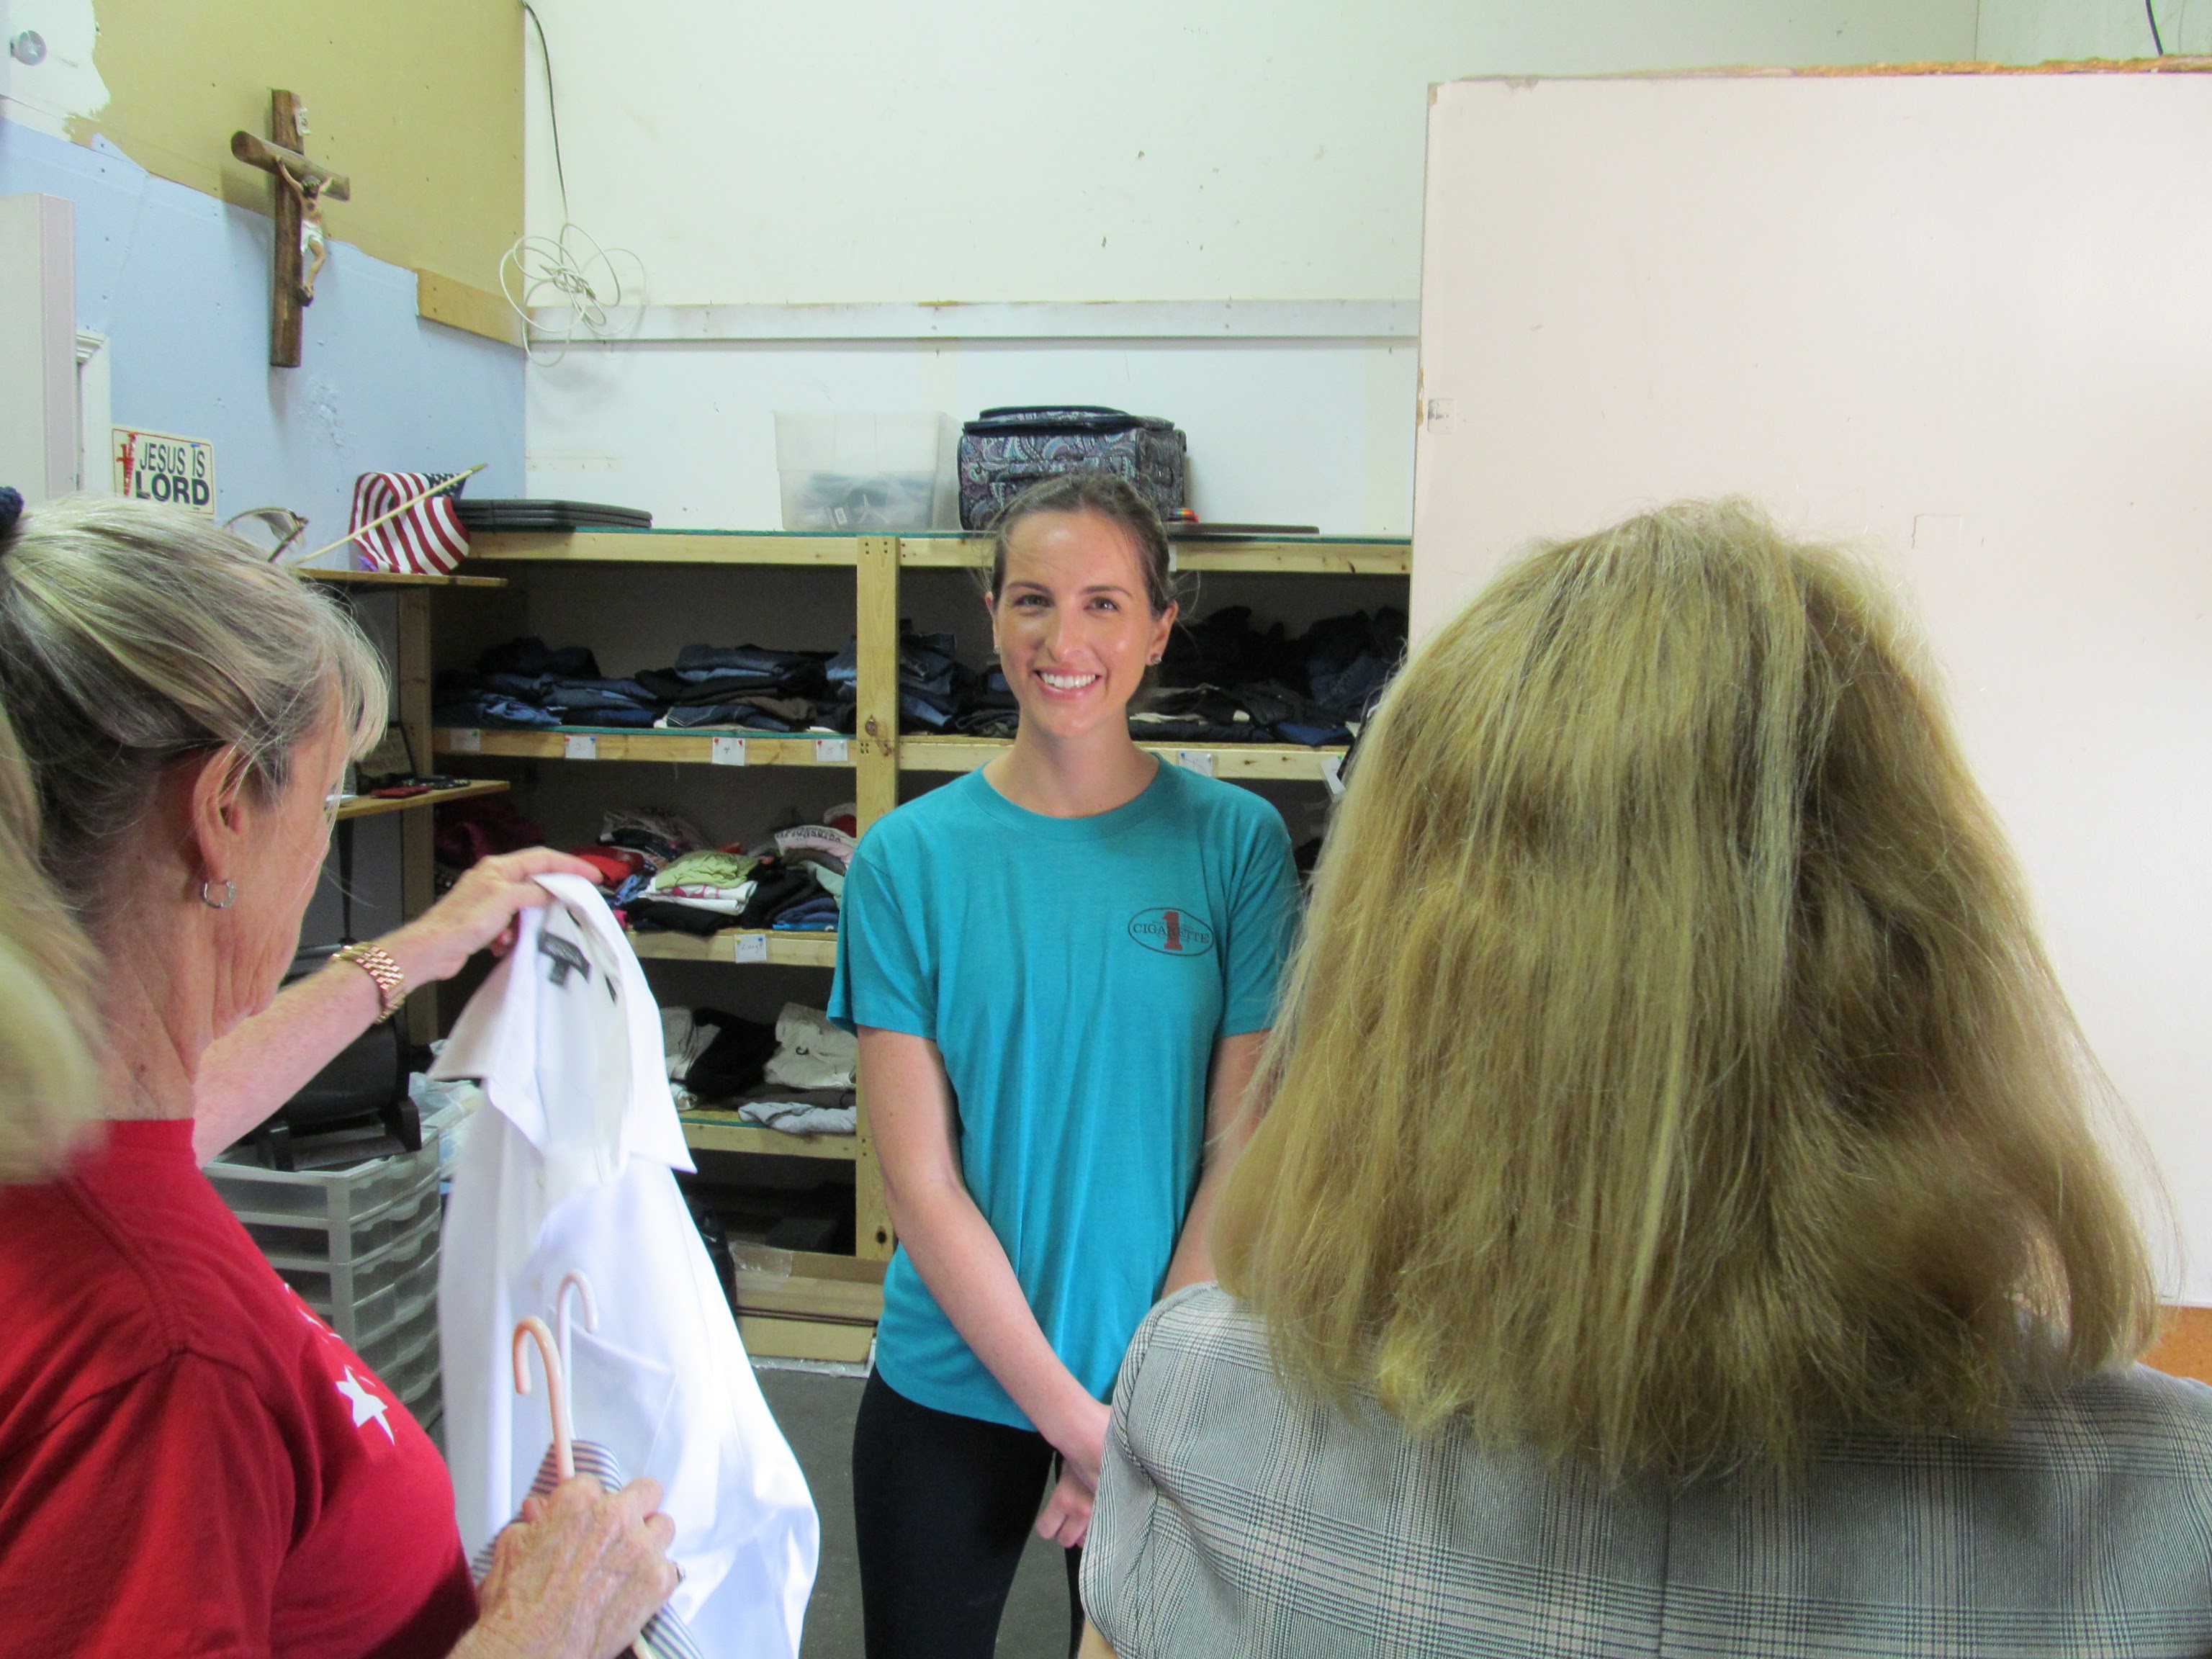 Members of non profit organization shows donated clothes.